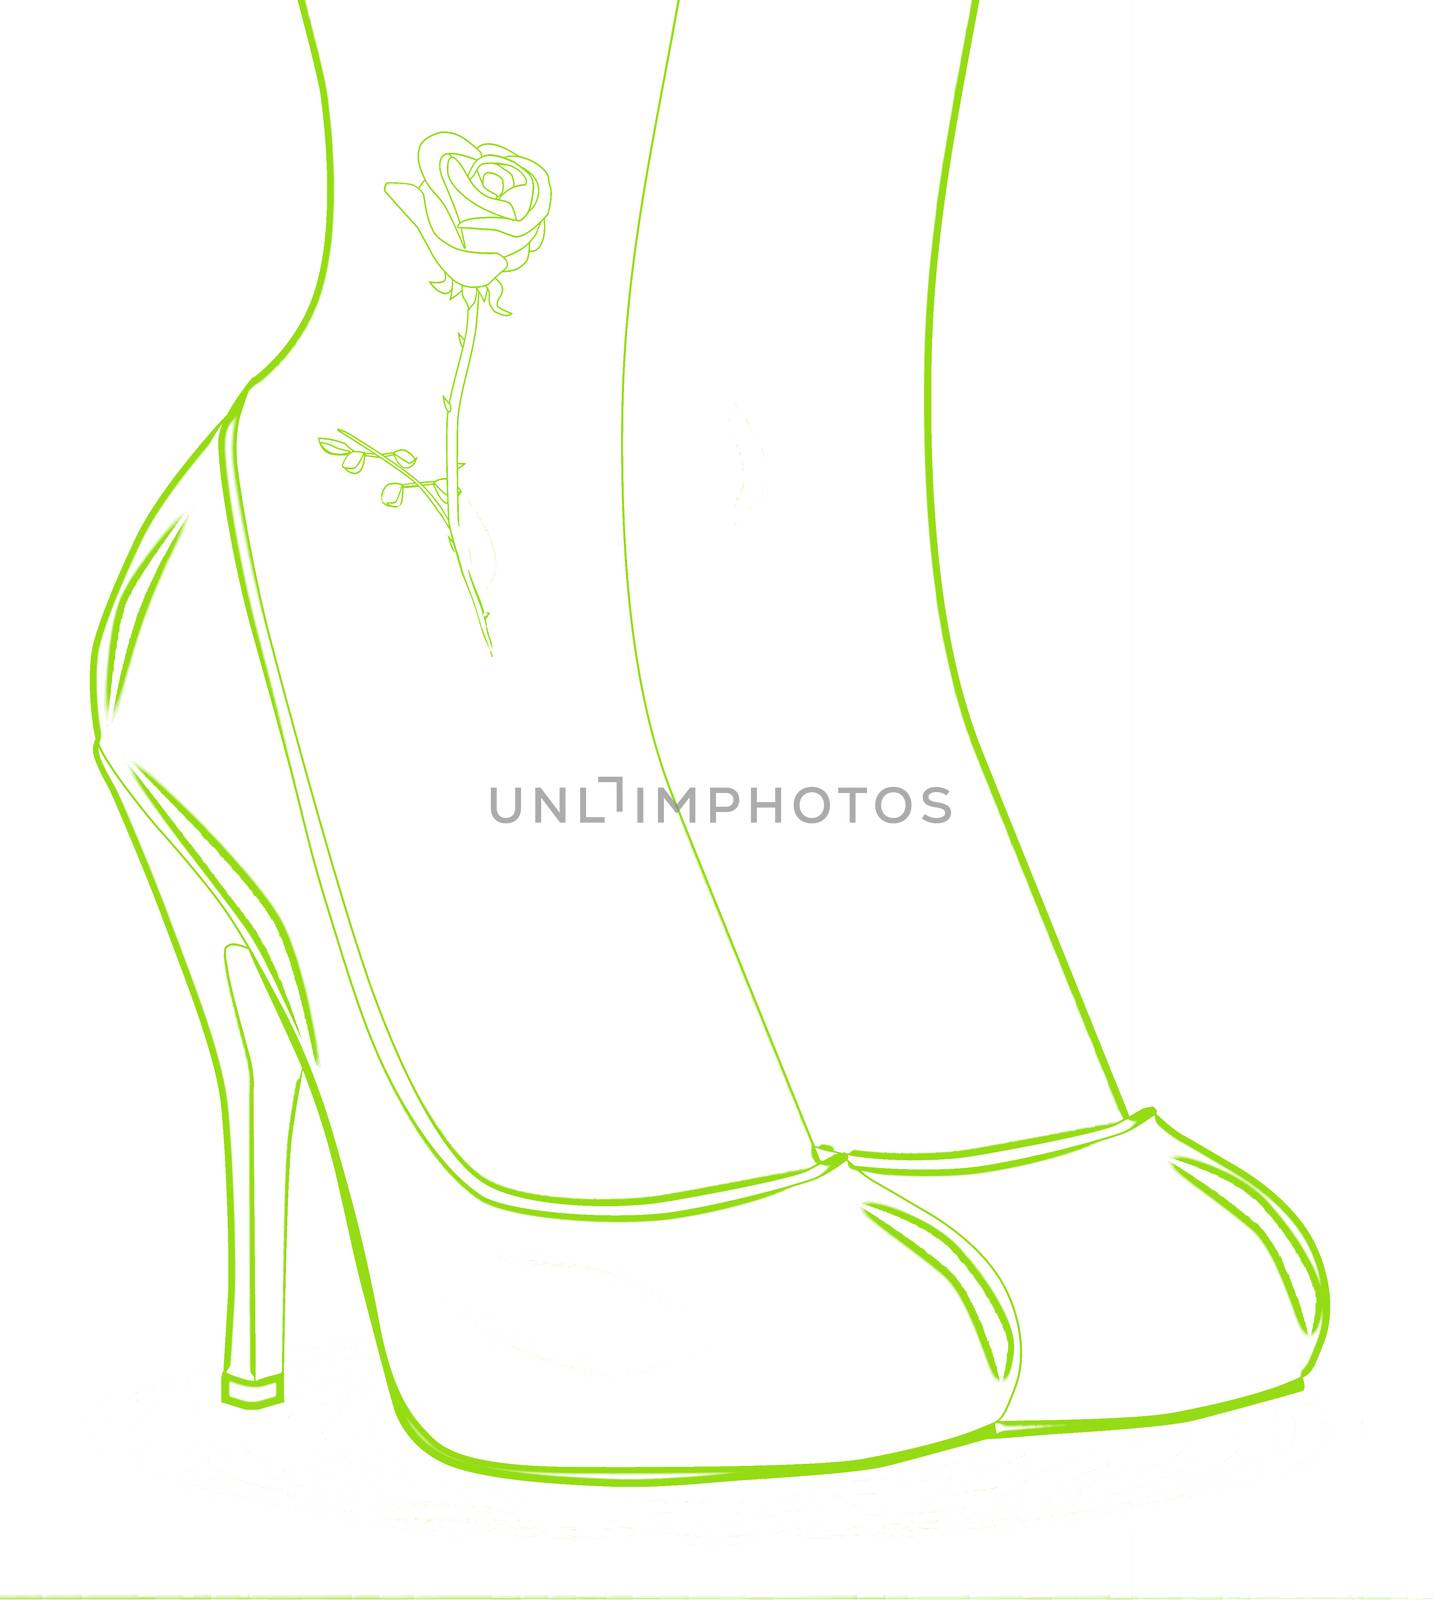 A pair of ladies legs with a red rose tattoo in steletto heal shoes in outline